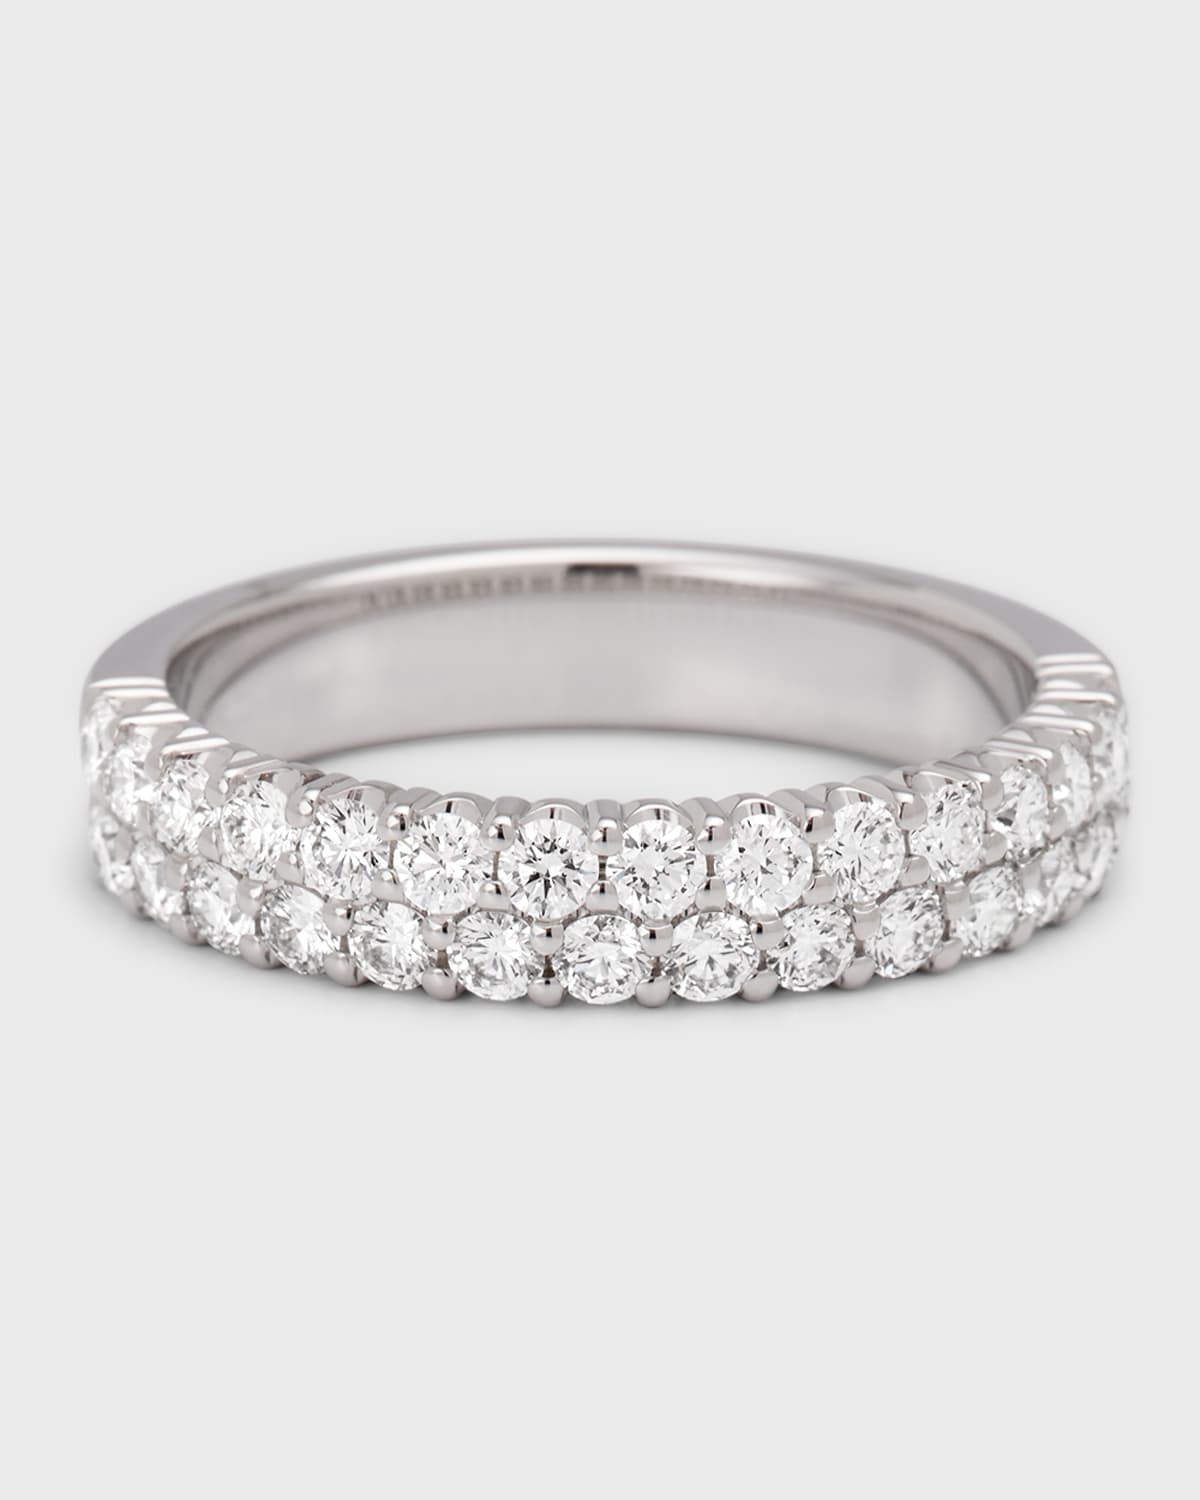 Two-Row Diamond Eternity Band Ring in 18K White Gold, 0.90 tdcw, Size 6.75